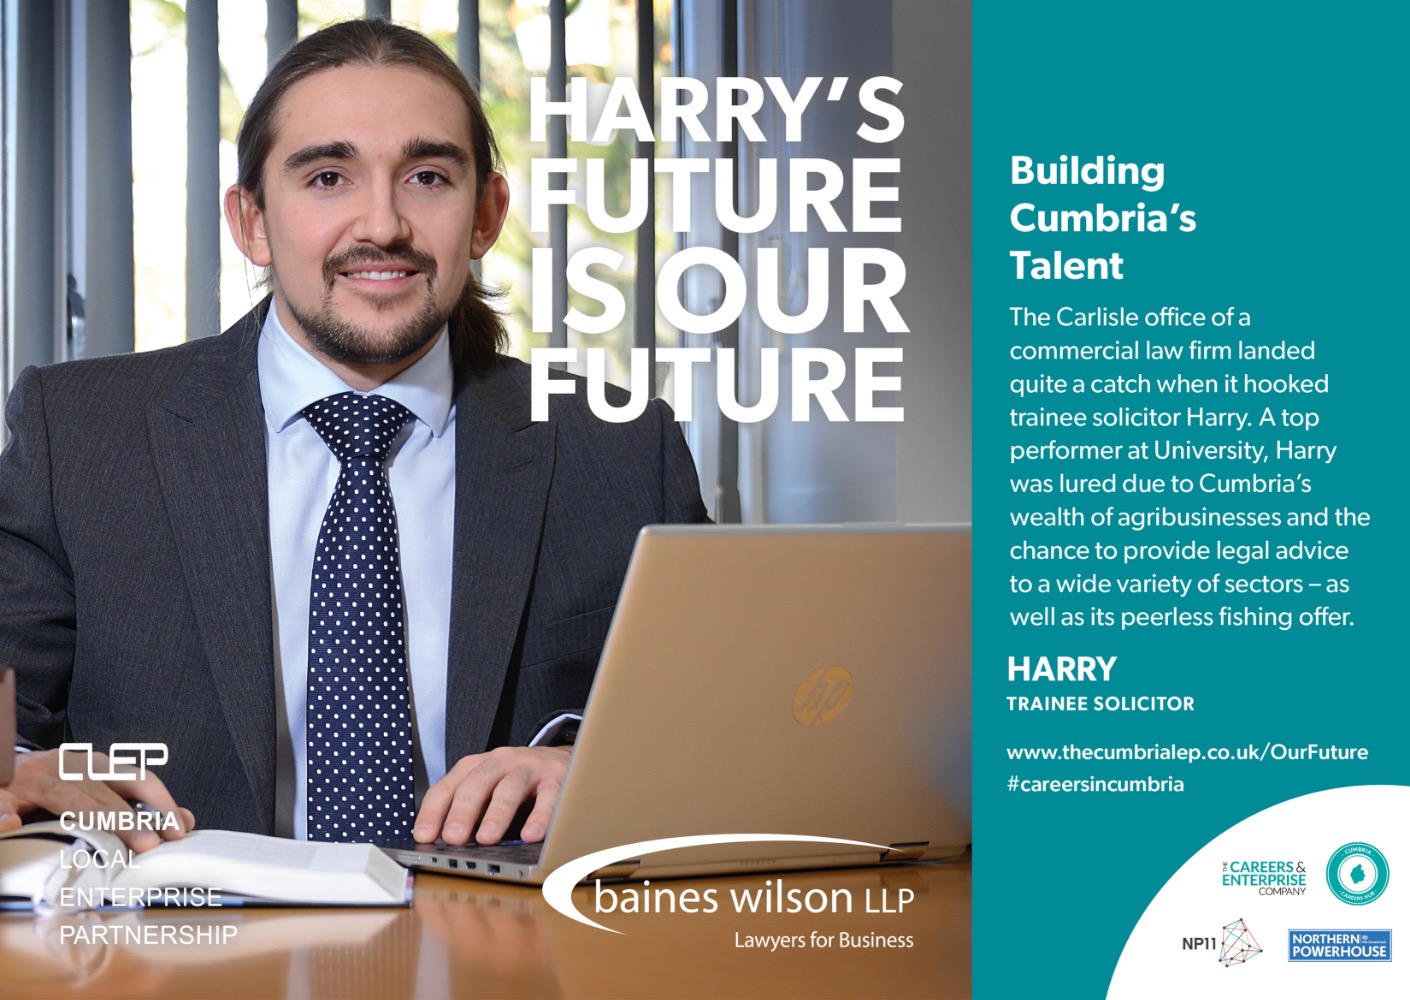 Building Cumbria's Talent - The Carlisle office of a commercial law firm landed quite a catch when it hooked up trainee solicitor Harry. A top performer at University, Harry was lured due to Cumbria's wealth of agribusinesses and the chance to provide legal advice to a wide variety of sectors - as well as its peerless fishing offer. (Photo of Harry, trainee solicitor).